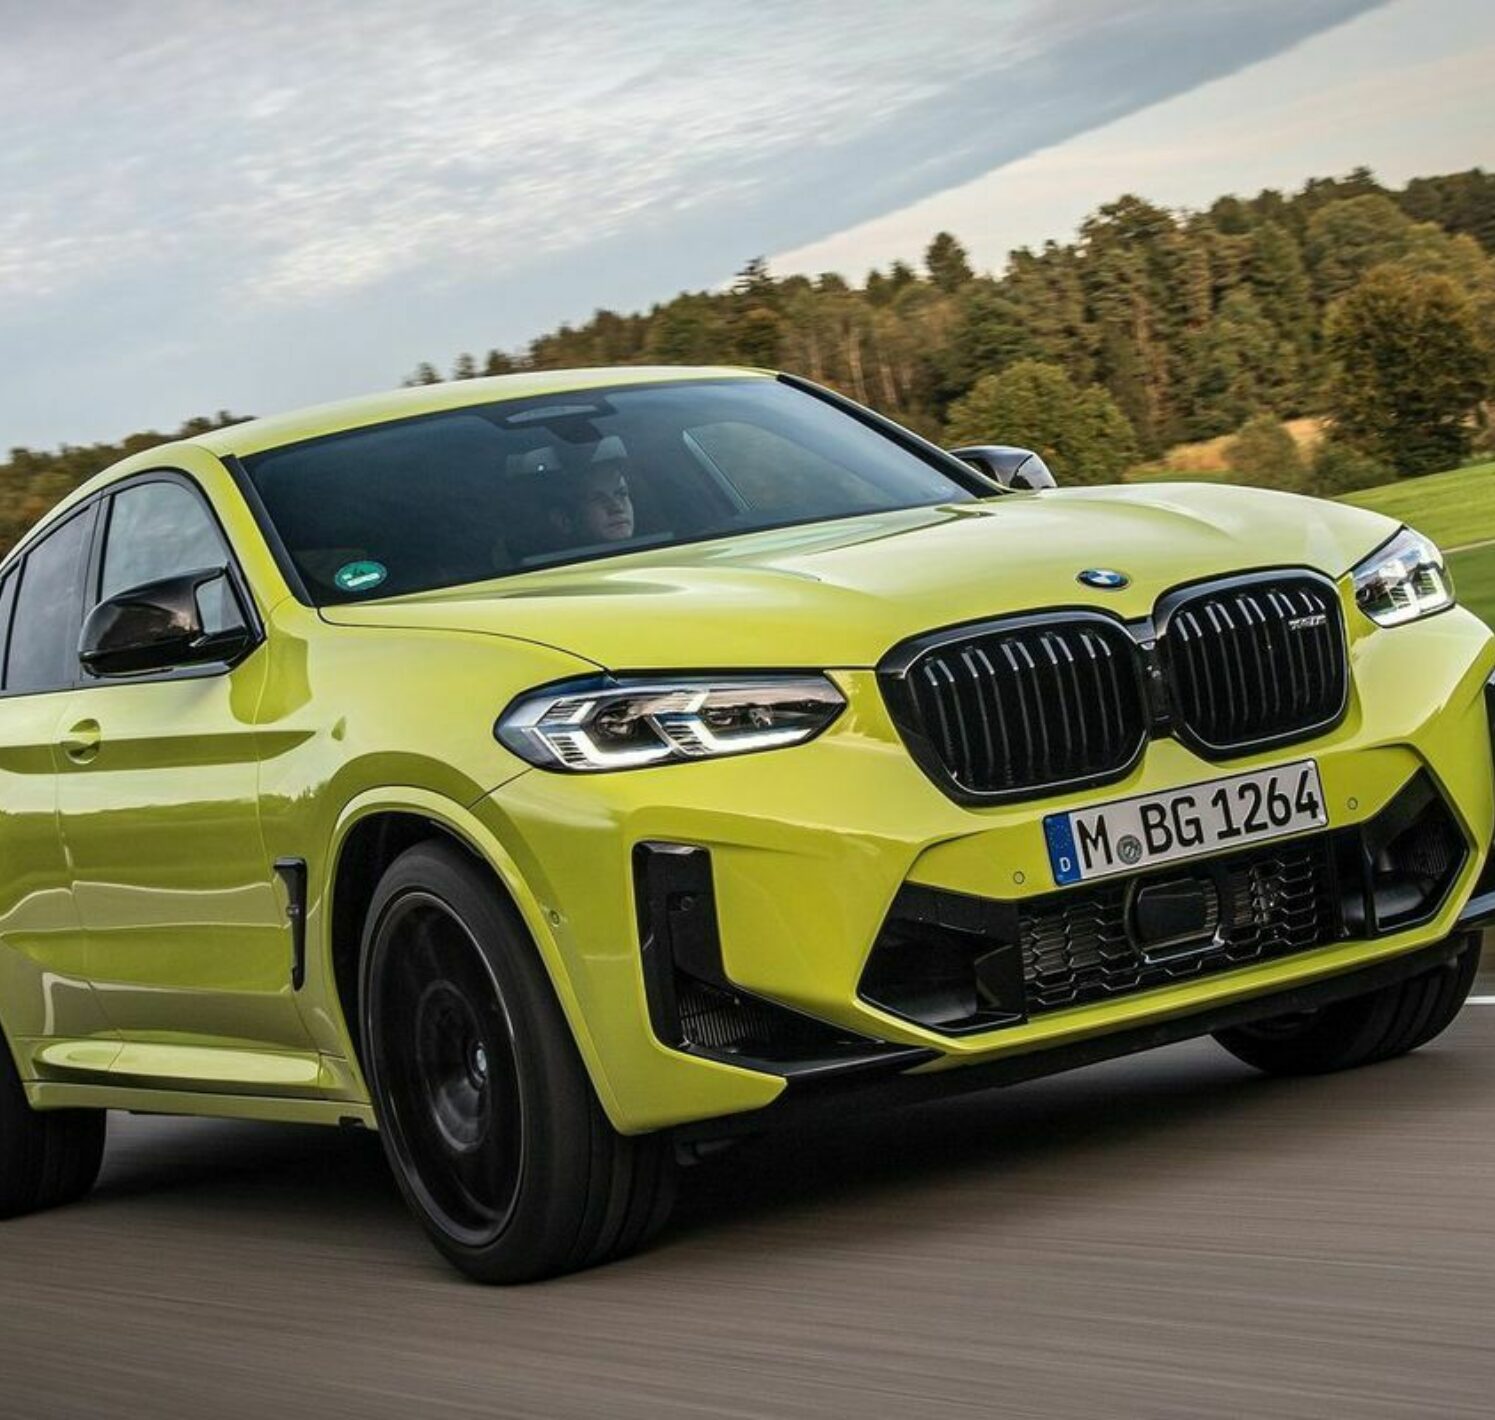 https://autofilter.sk/assets/images/x4-m/gallery/bmw-x4-m-competition-2022_02-galeria.jpg - obrazok